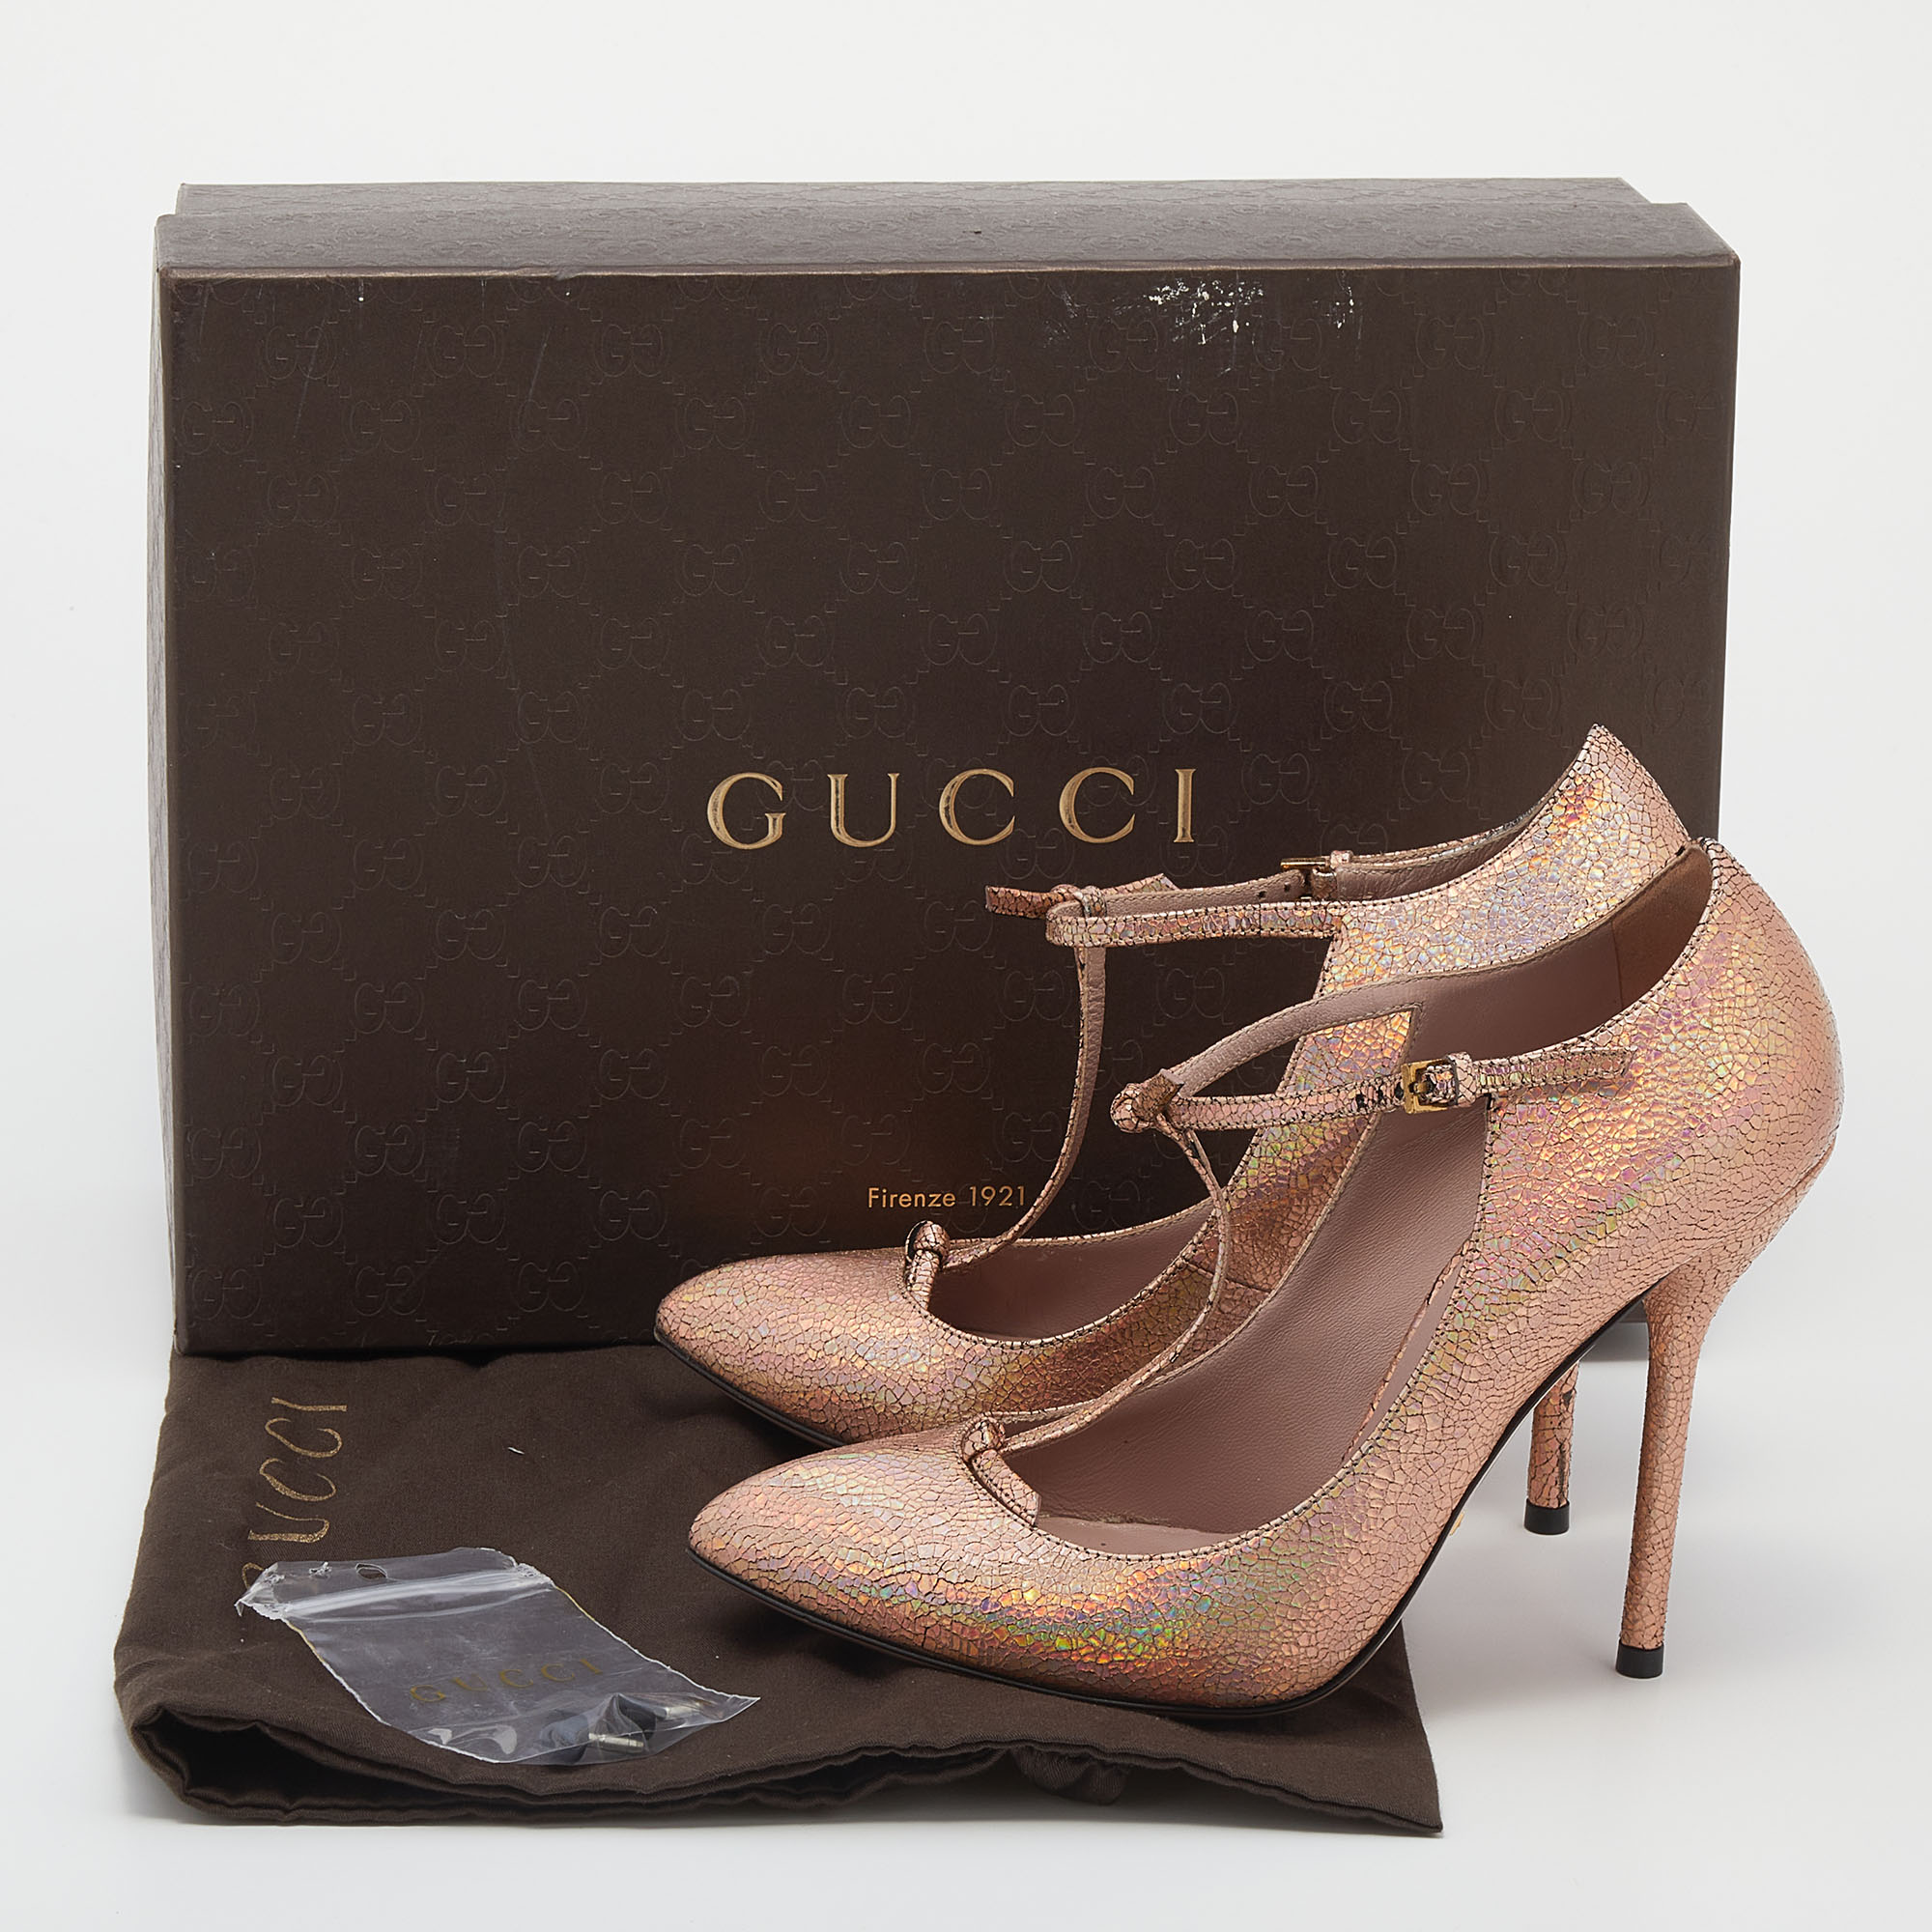 Gucci Metallic Holographic Crackled Leather Beverly T-Strap Pumps Size 37